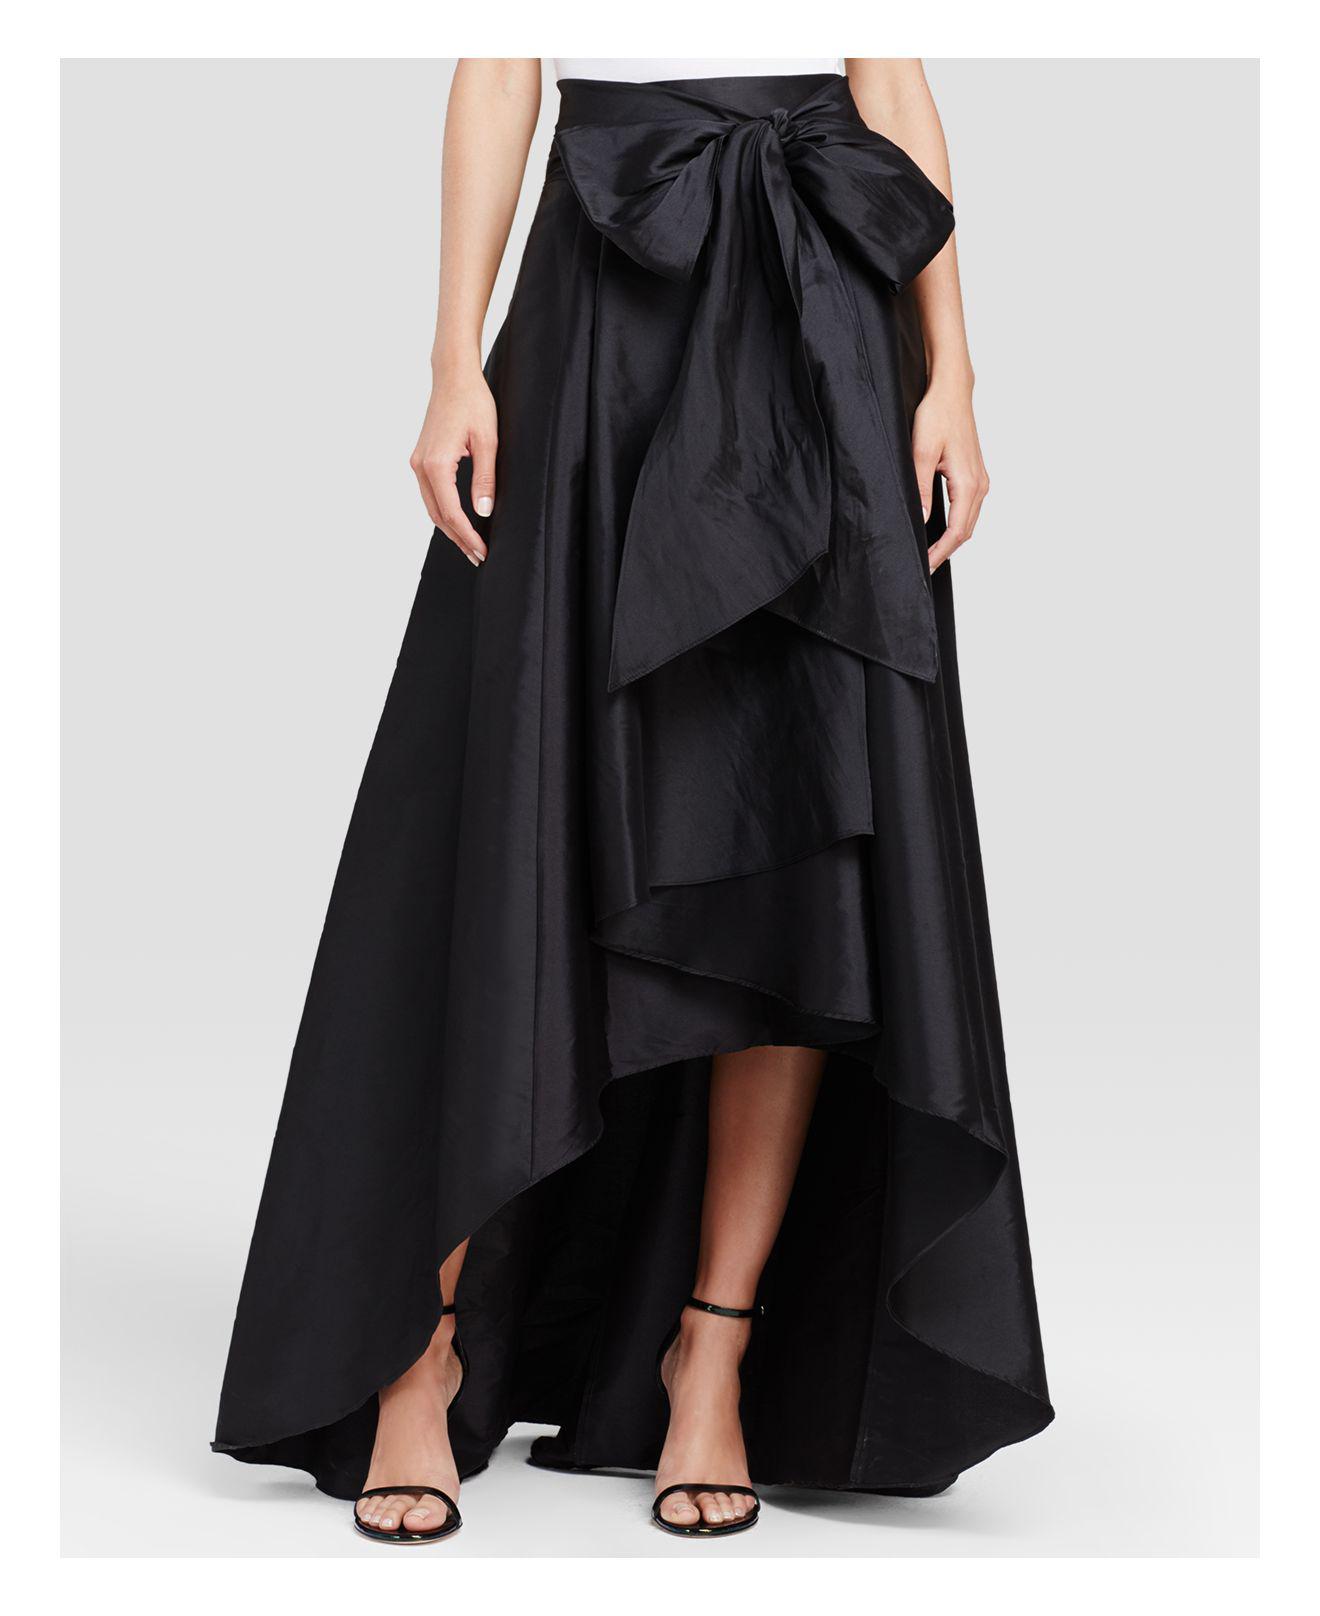 Adrianna Papell Synthetic High/low Ball Skirt in Black | Lyst